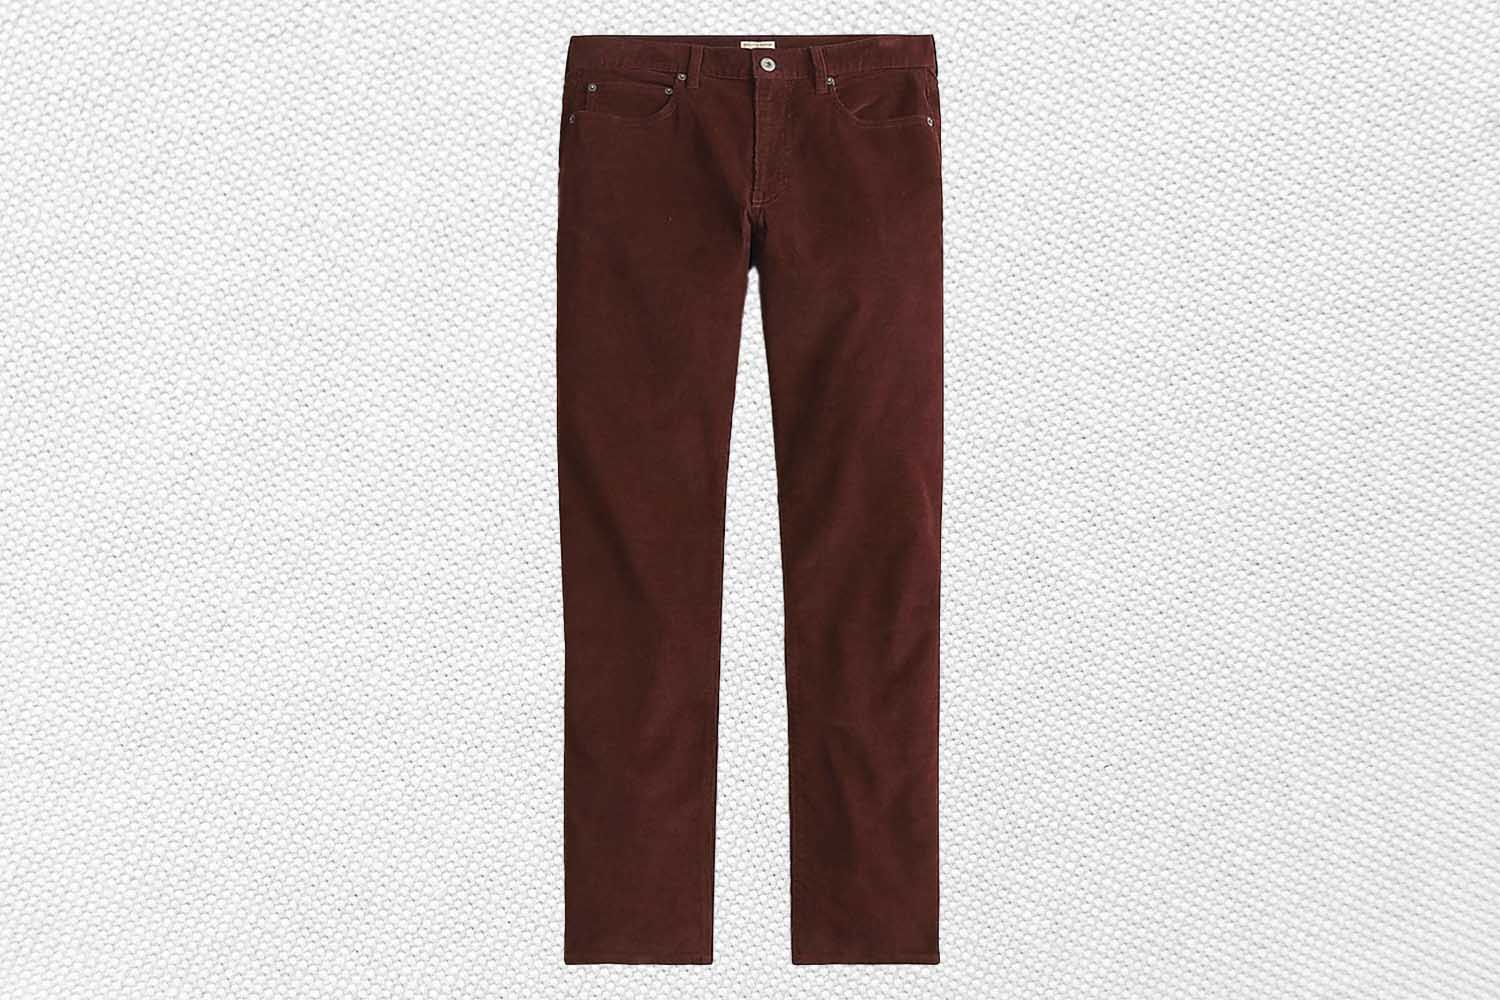 a pair of dark rown corduroy pants from J.Crew on a grey background